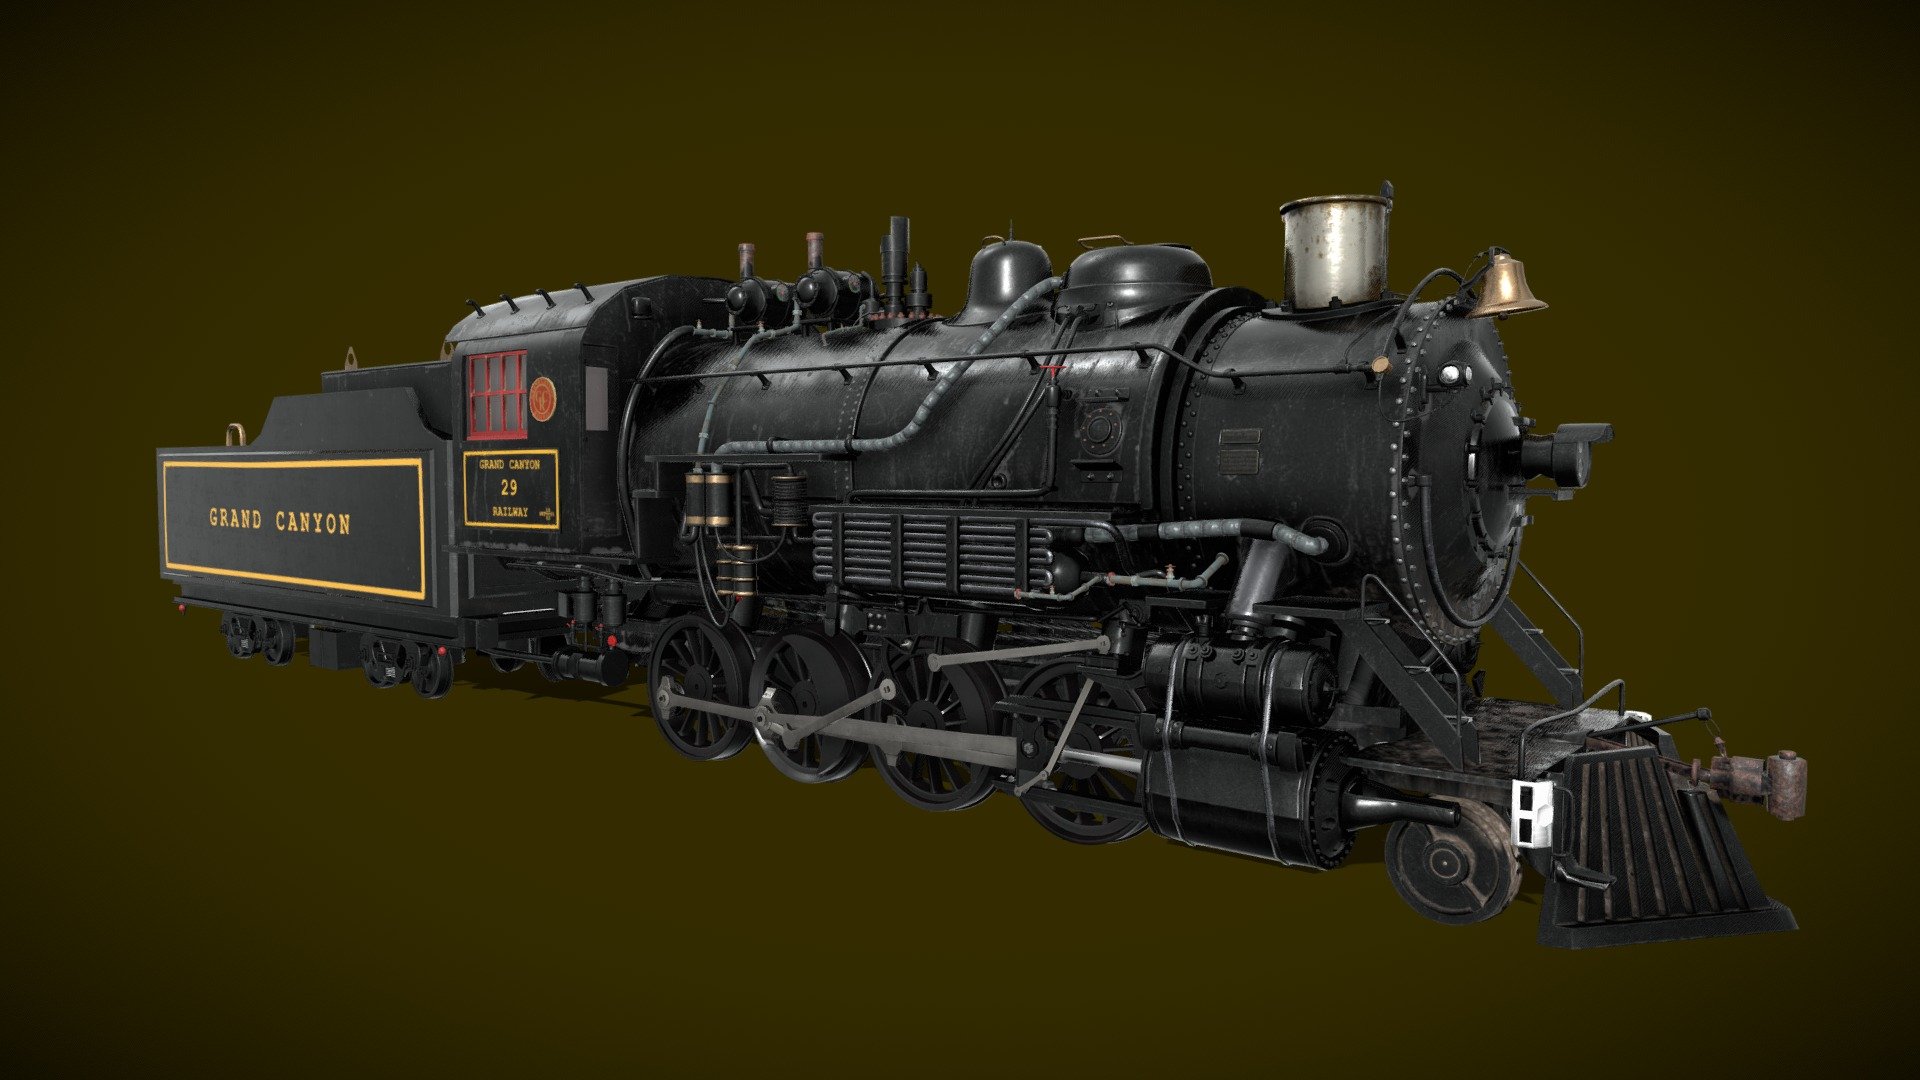 Steam locomotive made using a combination of different steam trains as referances. Of course most of them were grand canyon trains. It took around 40-50 hours to create.

I recommend only downloading the supplied &ldquo;additional file